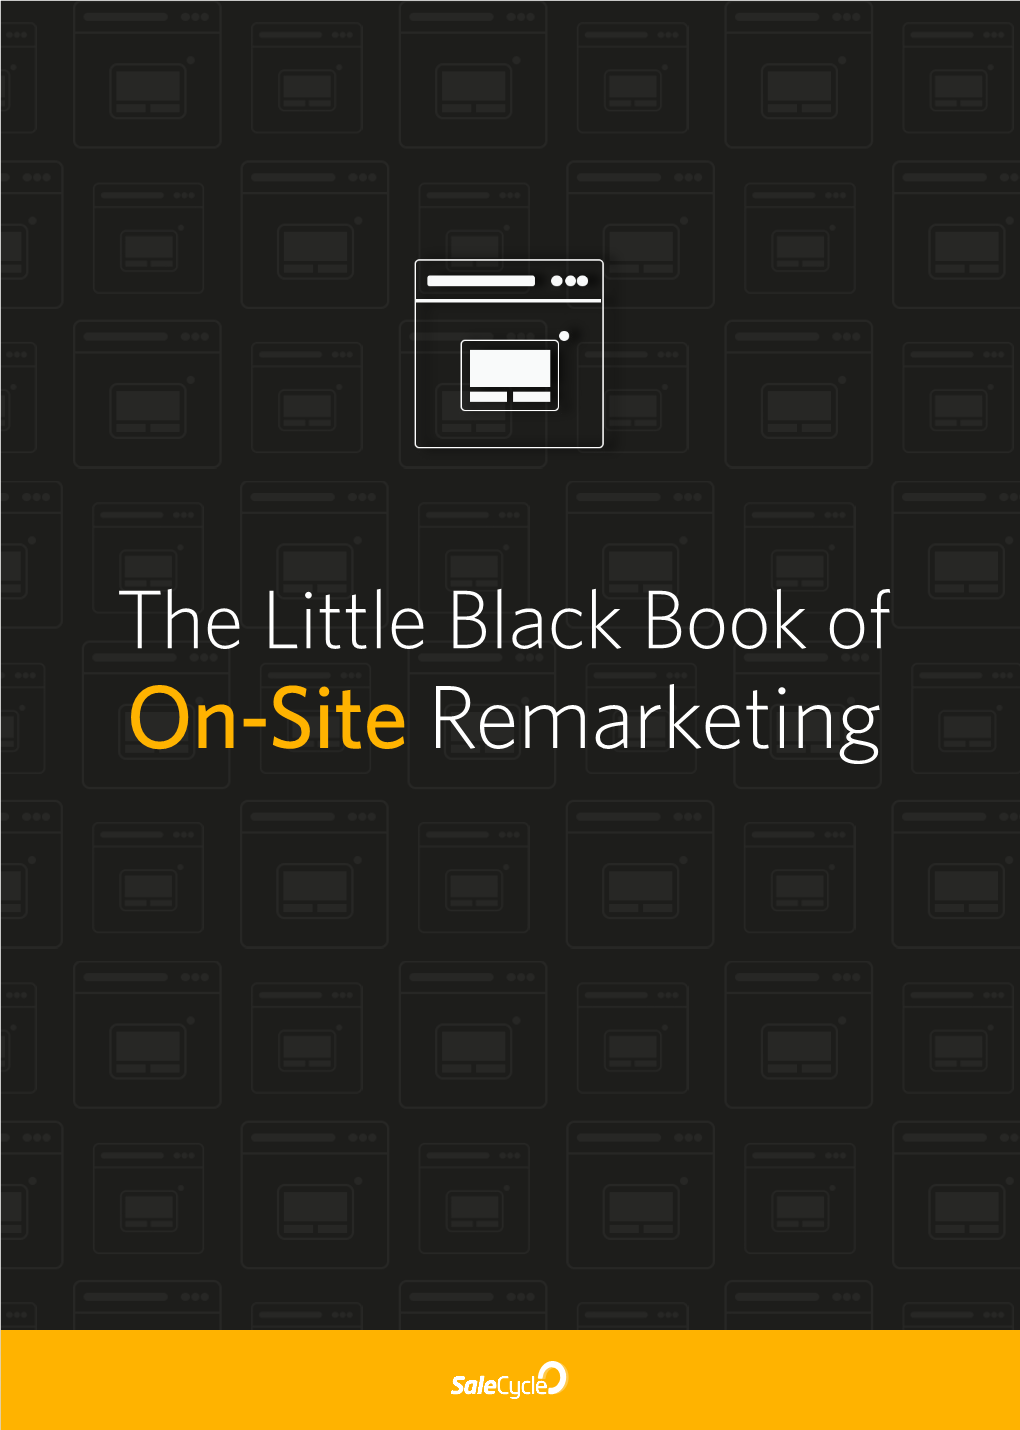 The Little Black Book of On-Site Remarketing Quick Links